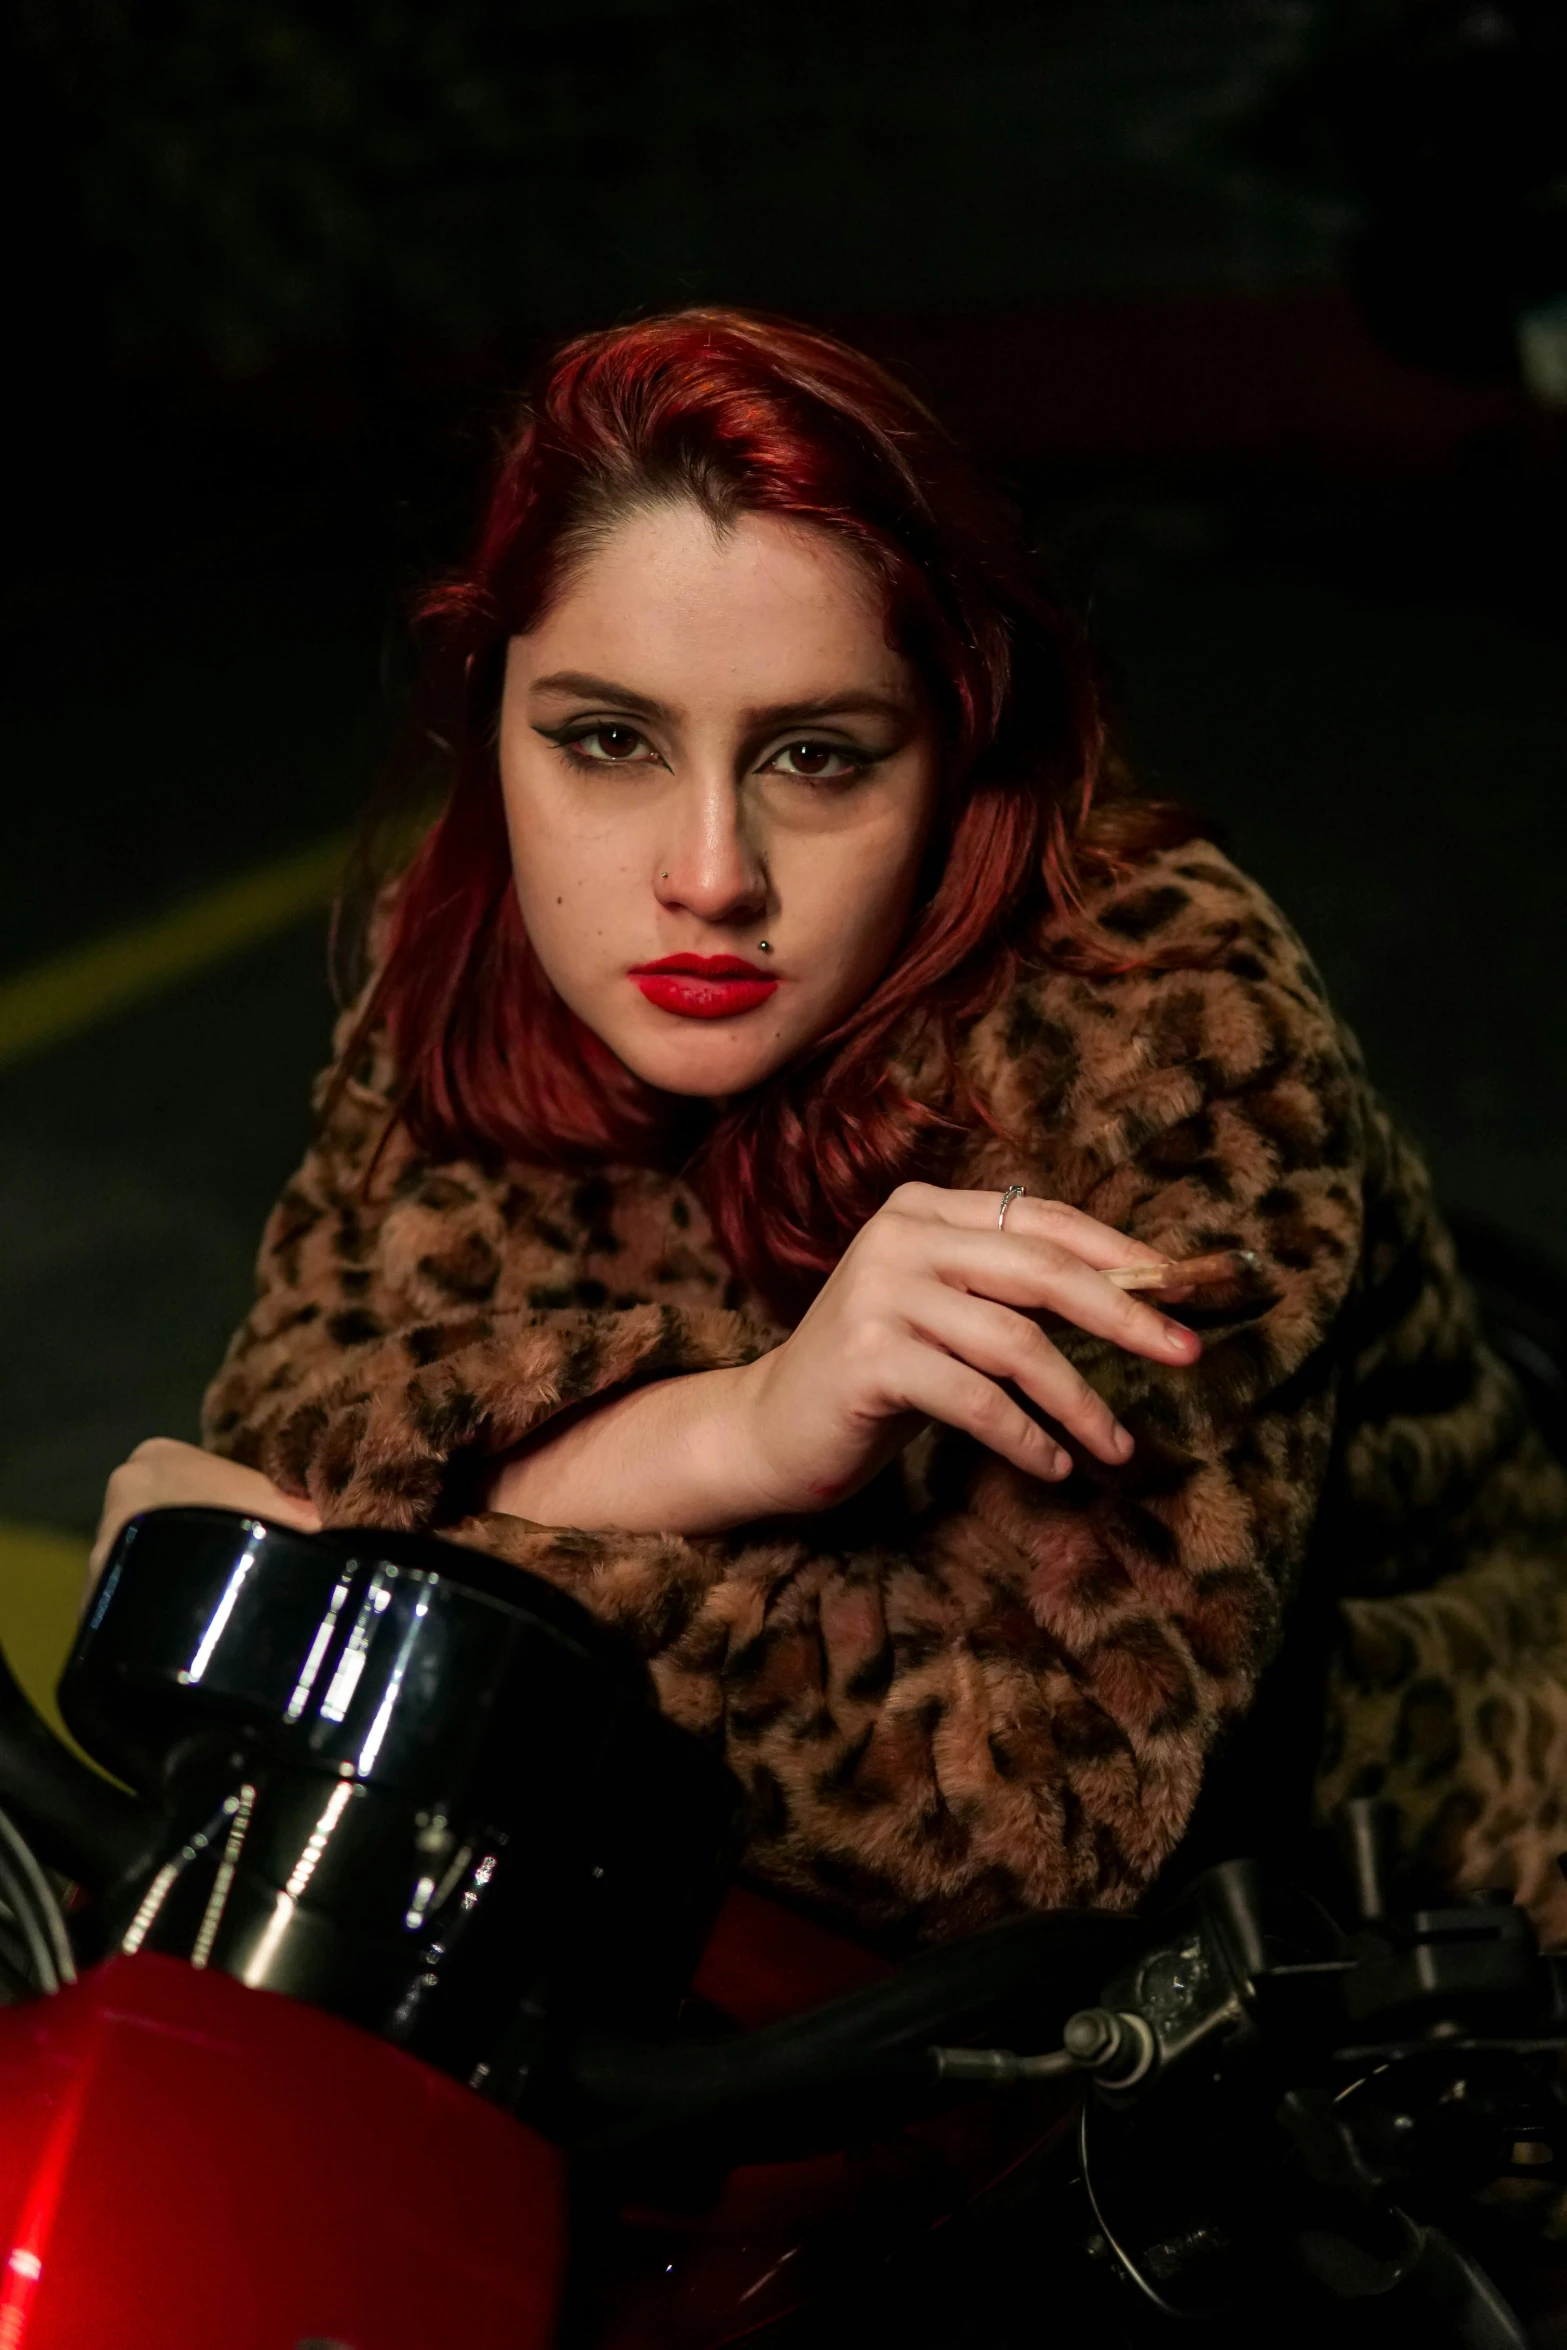 the young woman is sitting on her red motorcycle